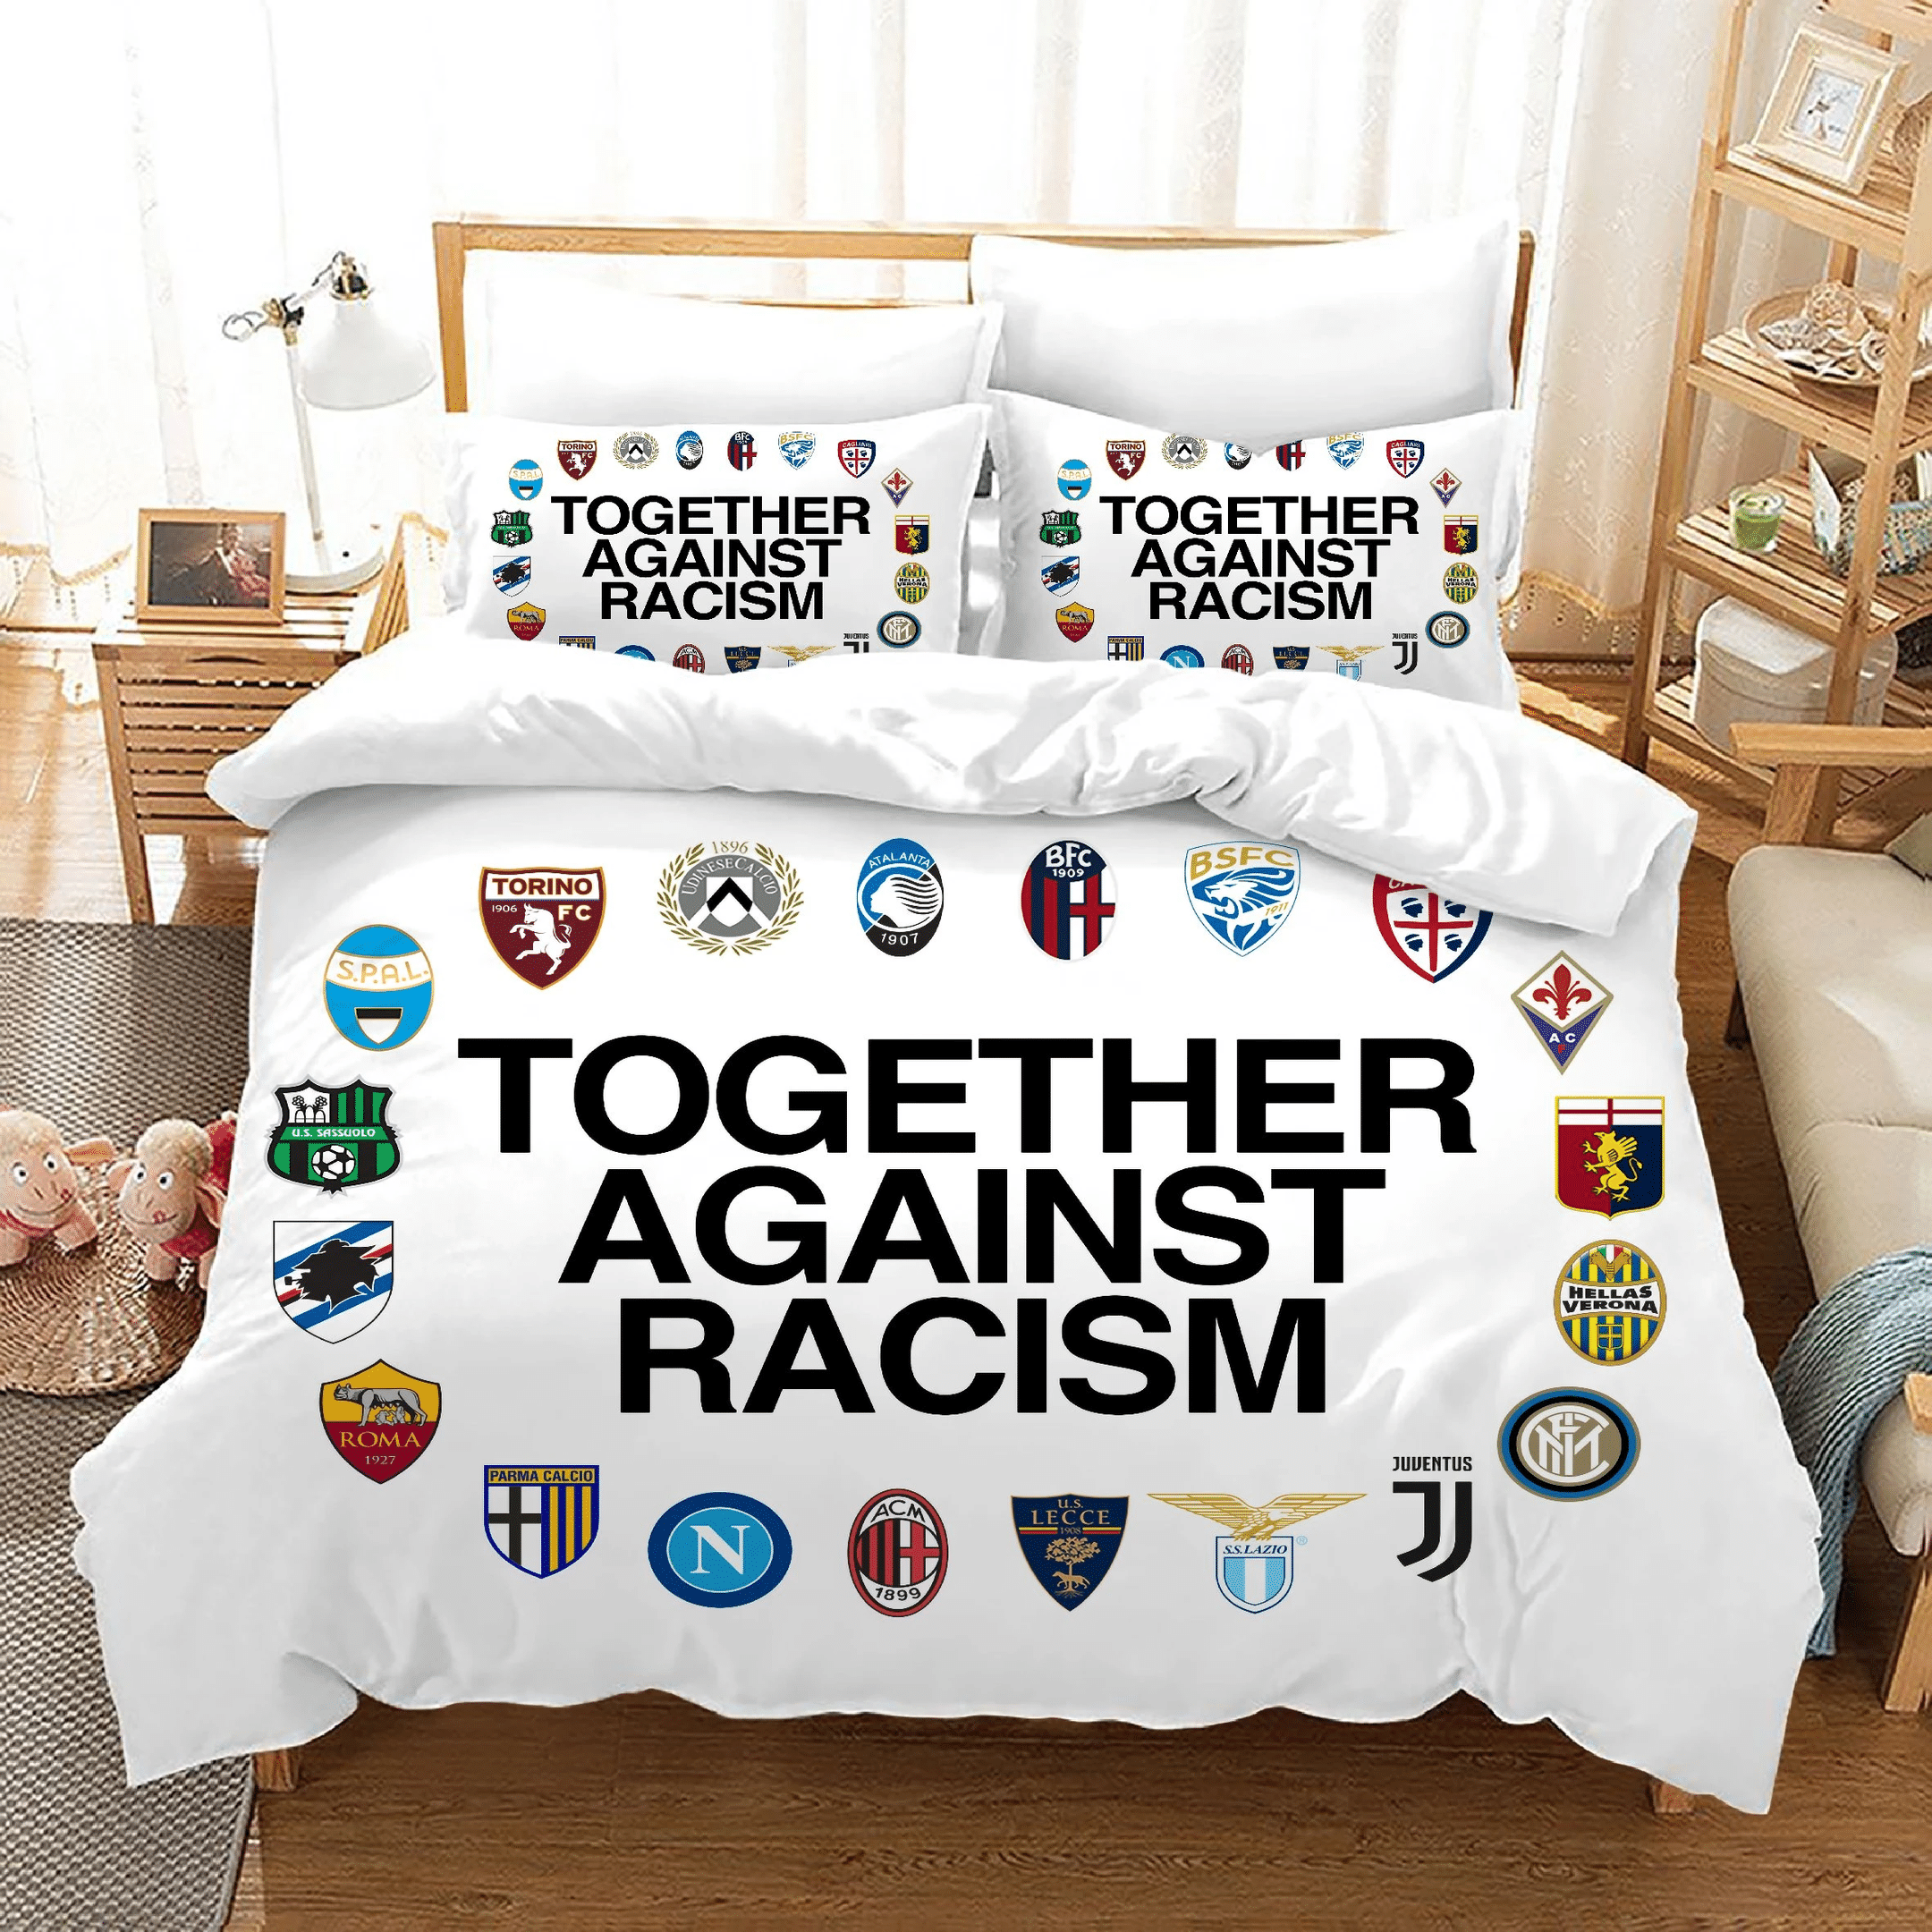 Together Agains Racism 7 Duvet Cover Quilt Cover Pillowcase Bedding